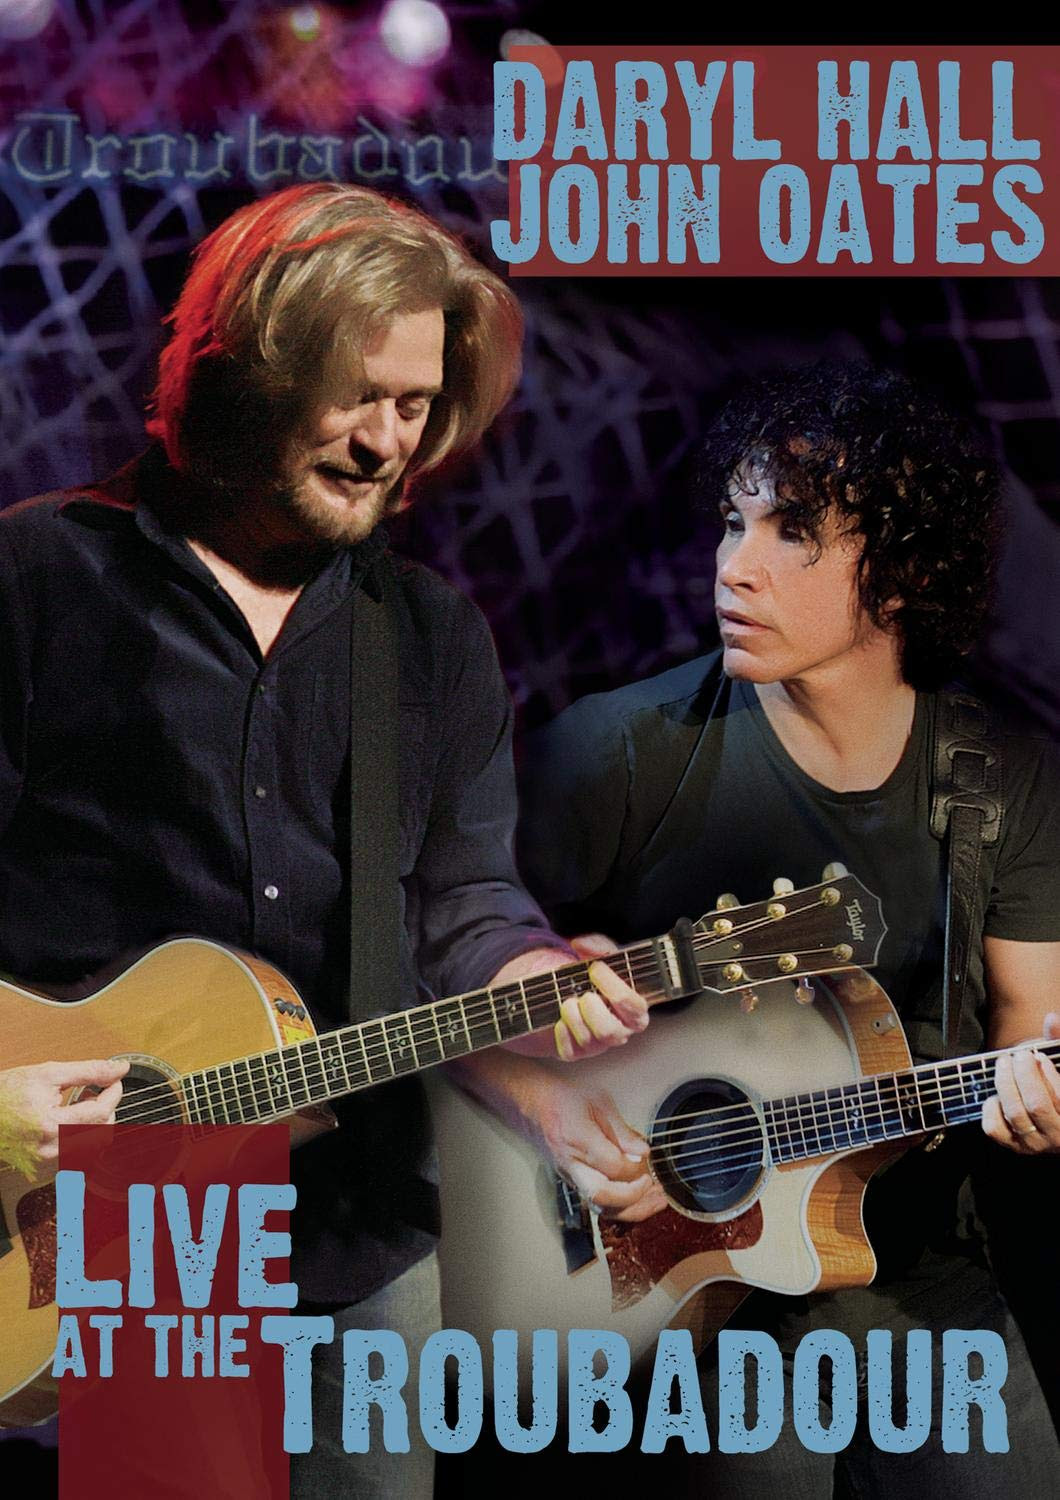 Daryl Hall and John Oates - `Live At The Troubadour` (Image courtesy of Wolfson Entertainment)